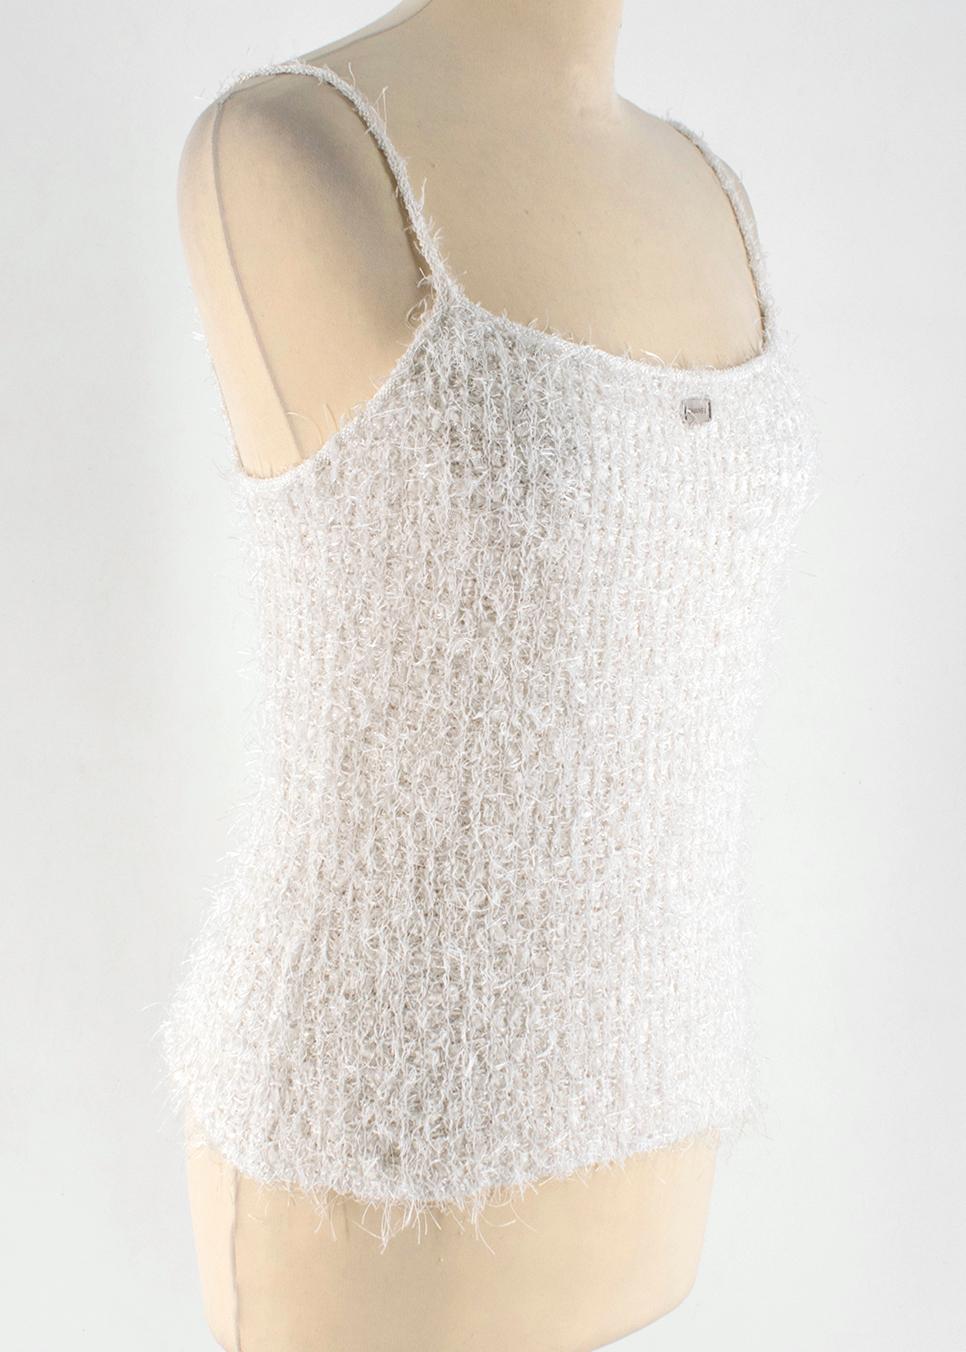 Chanel White Tweed Cami Top

White tweed tank top
Thin straps
Round neck 
Silver hardware
Silver Chanel on front of the top 

Please note, these items are pre-owned and may show some signs of storage, even when unworn and unused. This is reflected